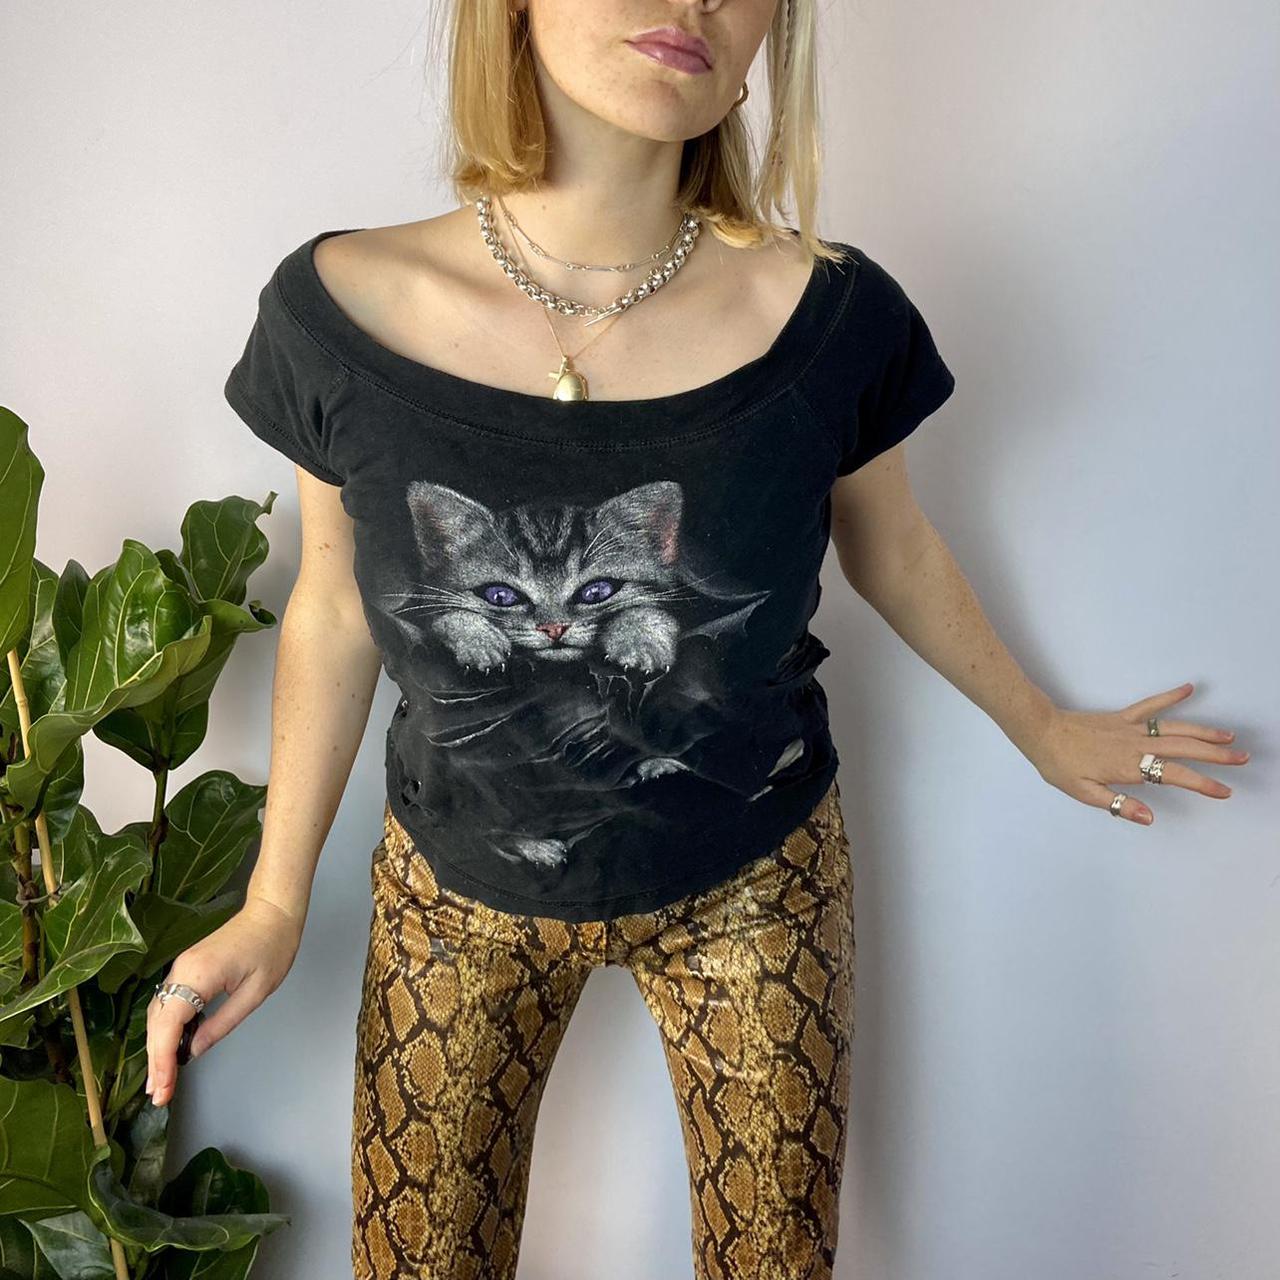 Product Image 4 - goth kitty top !!
Slashed effect